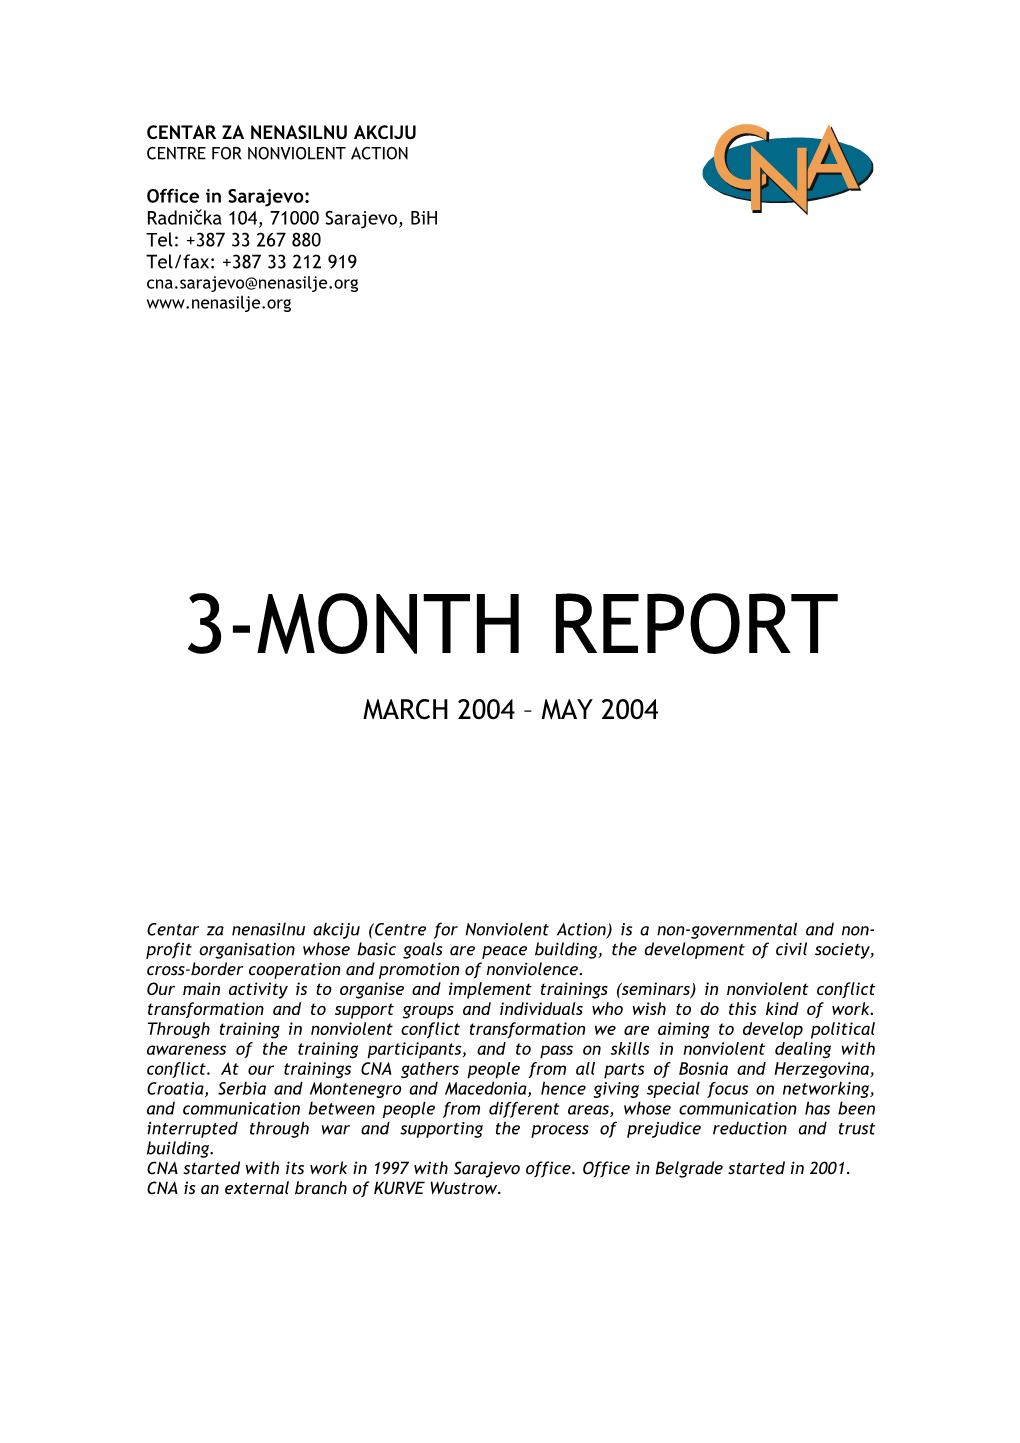 3-MONTH REPORT (March-May 2004)